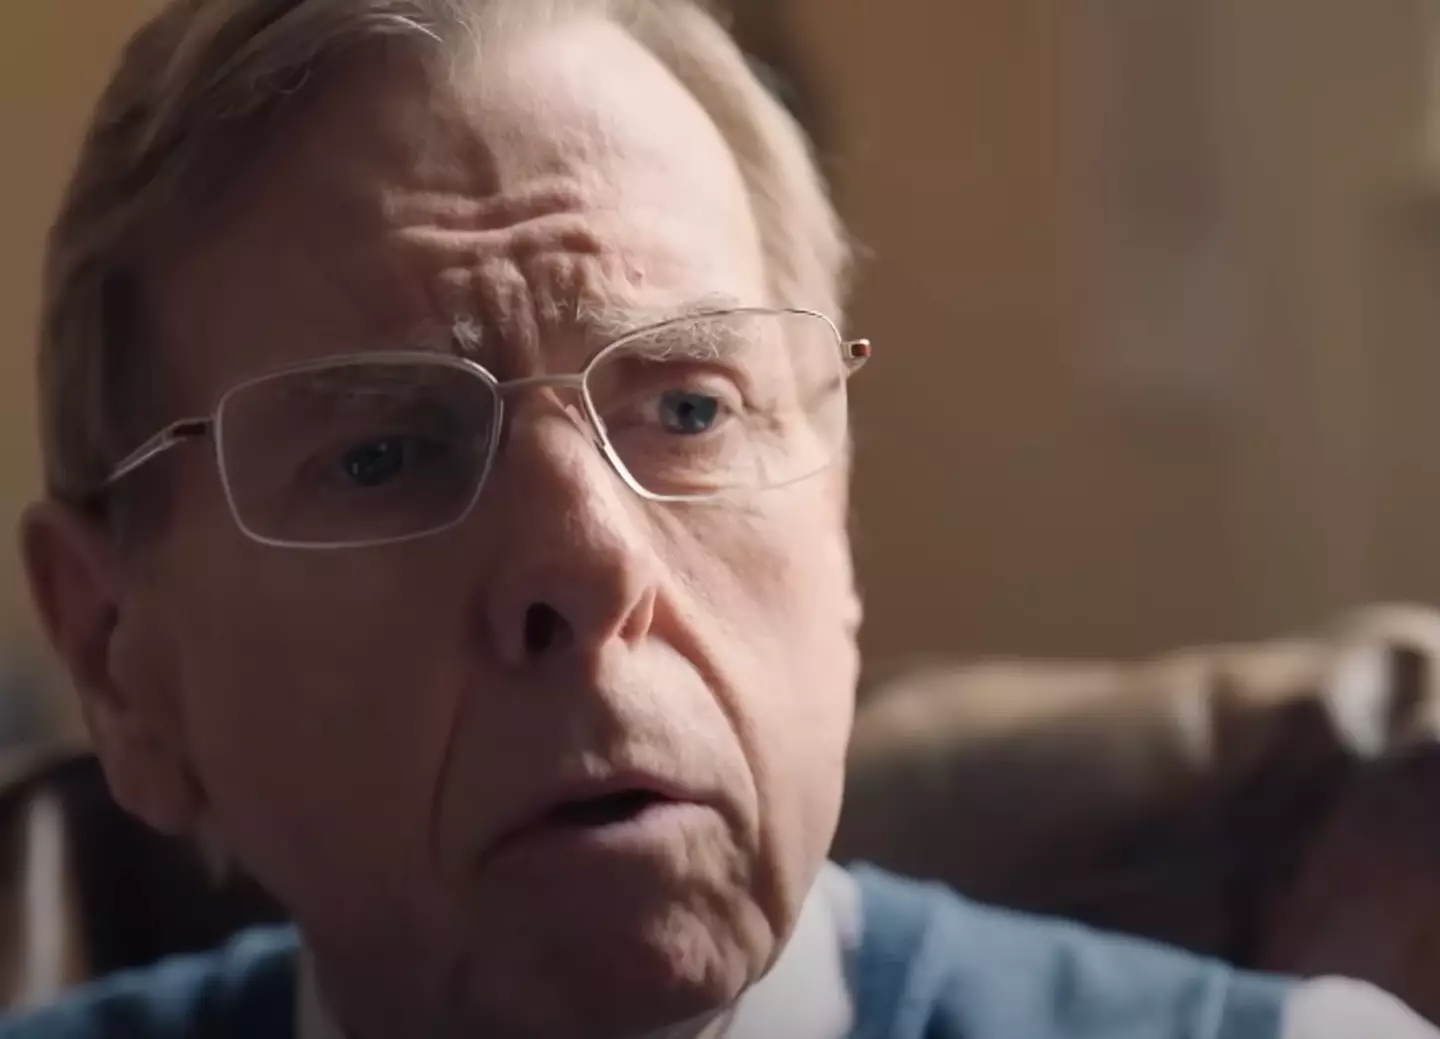 Timothy Spall plays one of Field's victims, Peter Farquhar.